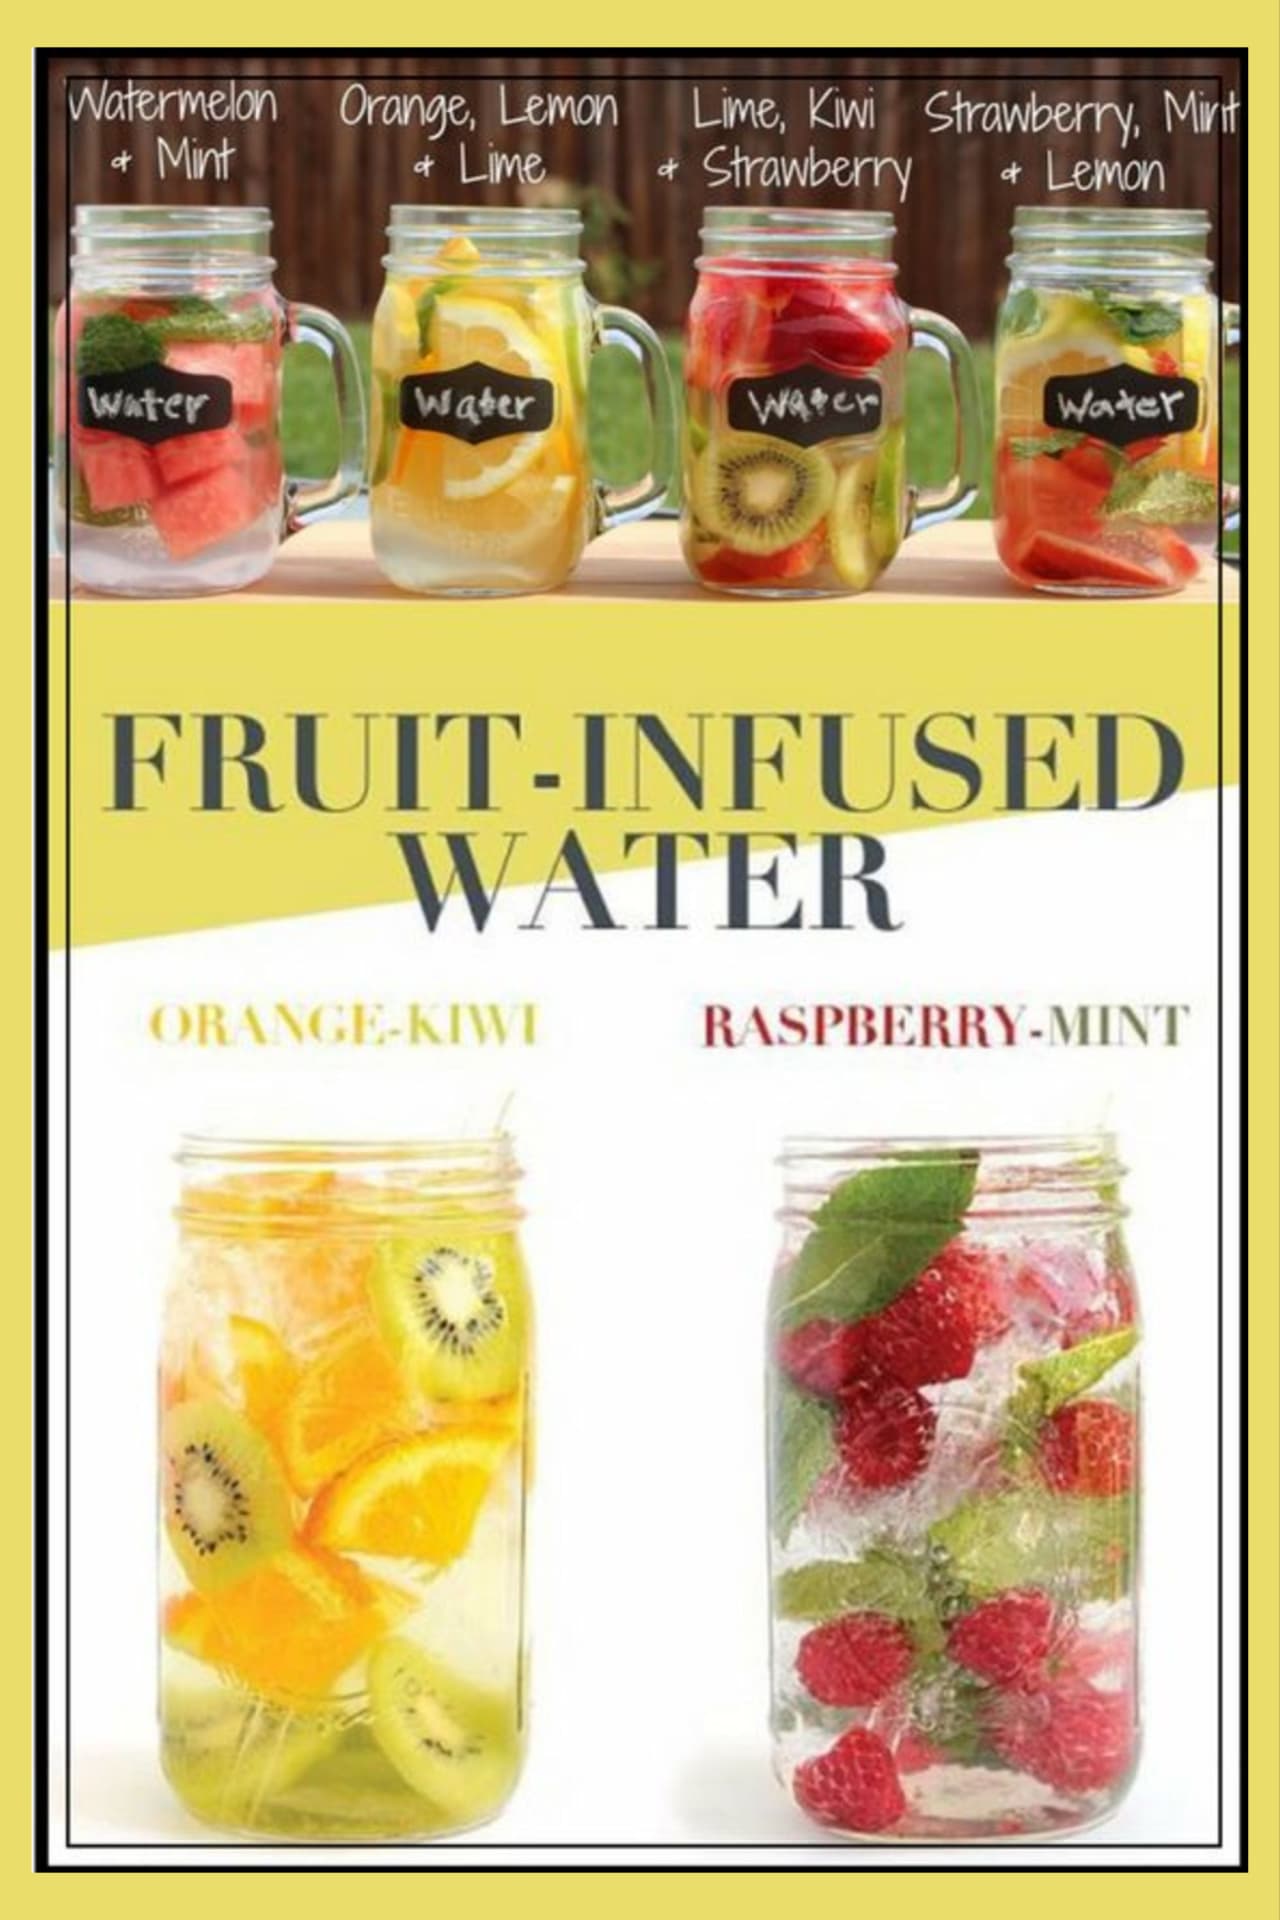 Best Infused Water Recipes - How to make infused water for weight loss, for skin, for energy or a flat belly - these healthy detox infused water recipes have so many health benefits - especially the vegetable and fruit infused water recipes